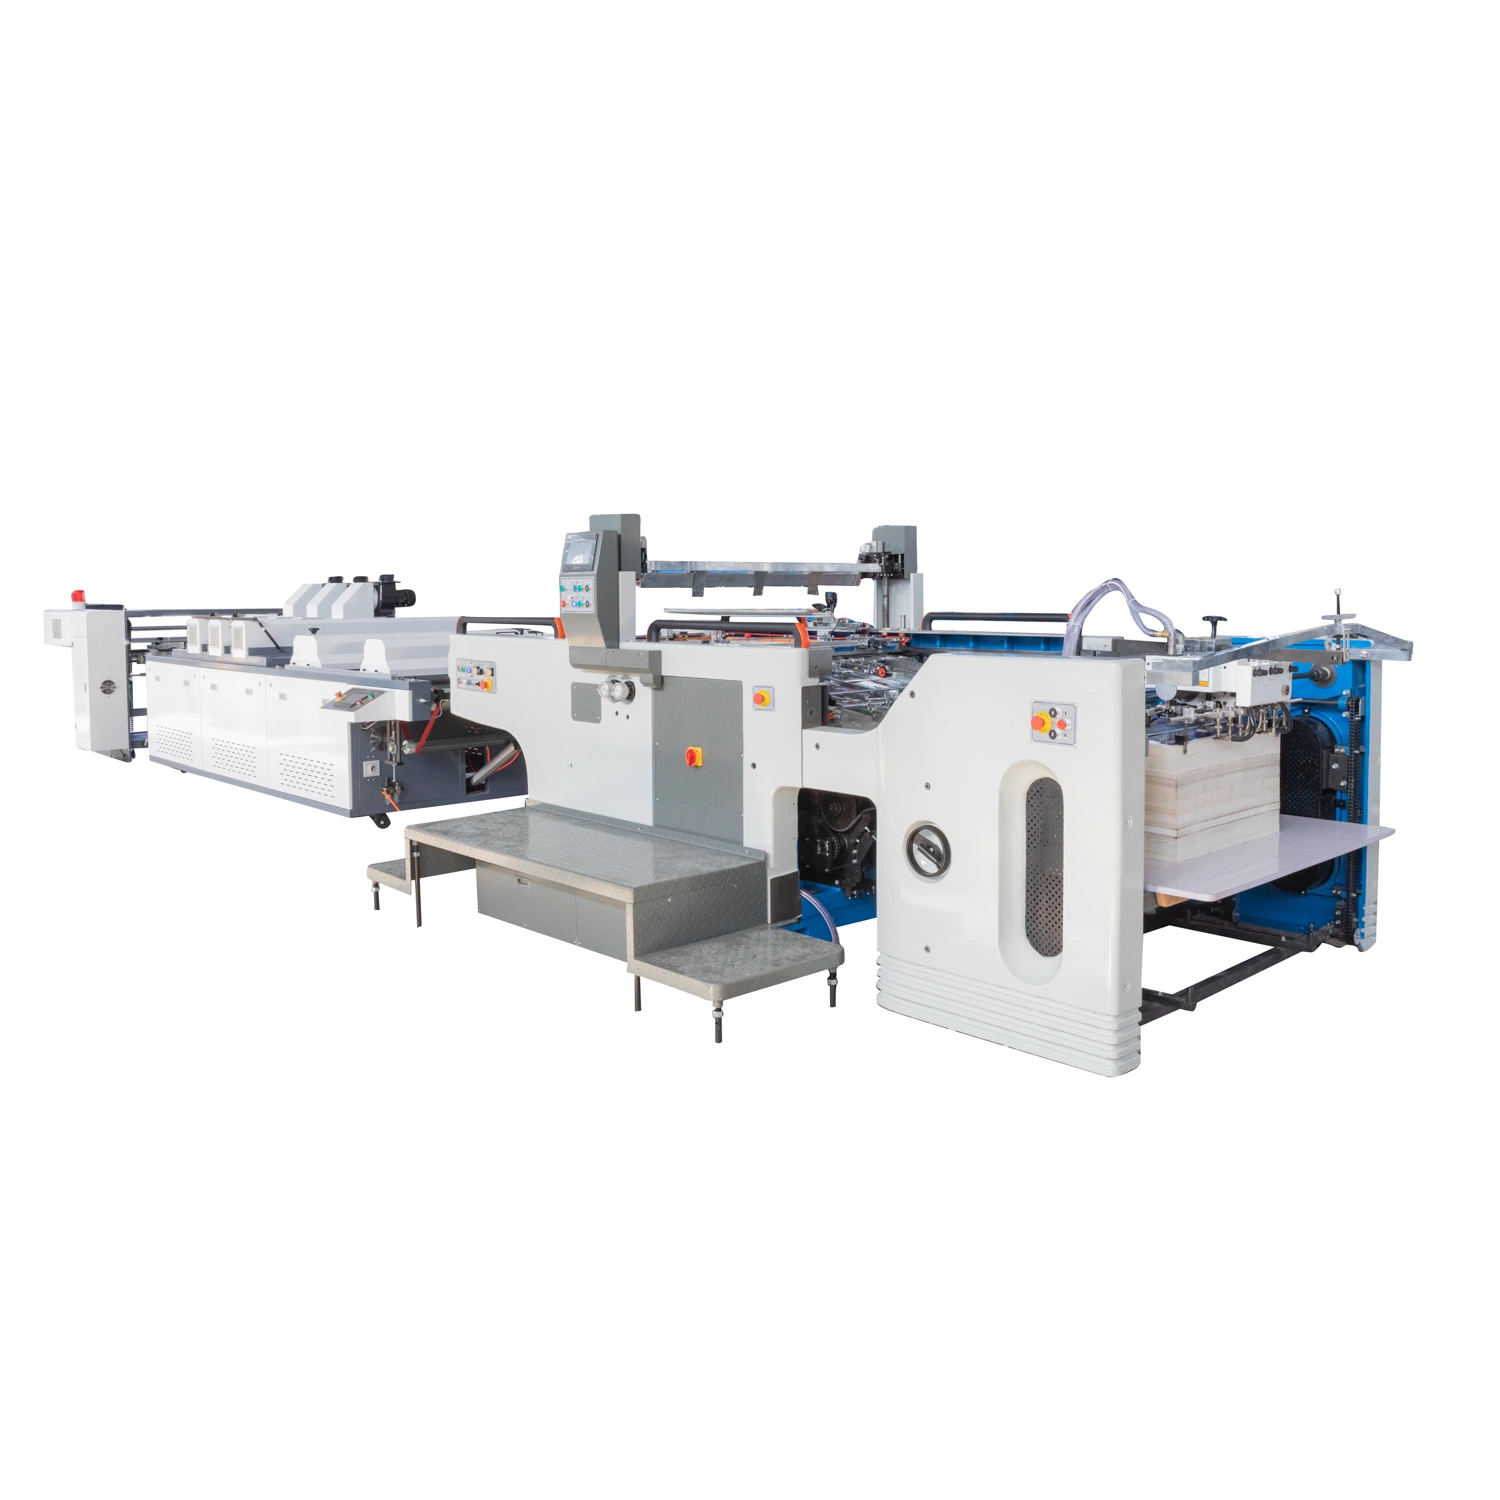 Automatic Silk Screen Printing with Spot Full UV Varnish Coating Curing Drying and Paper Stacking Machine for Printing and Packaging